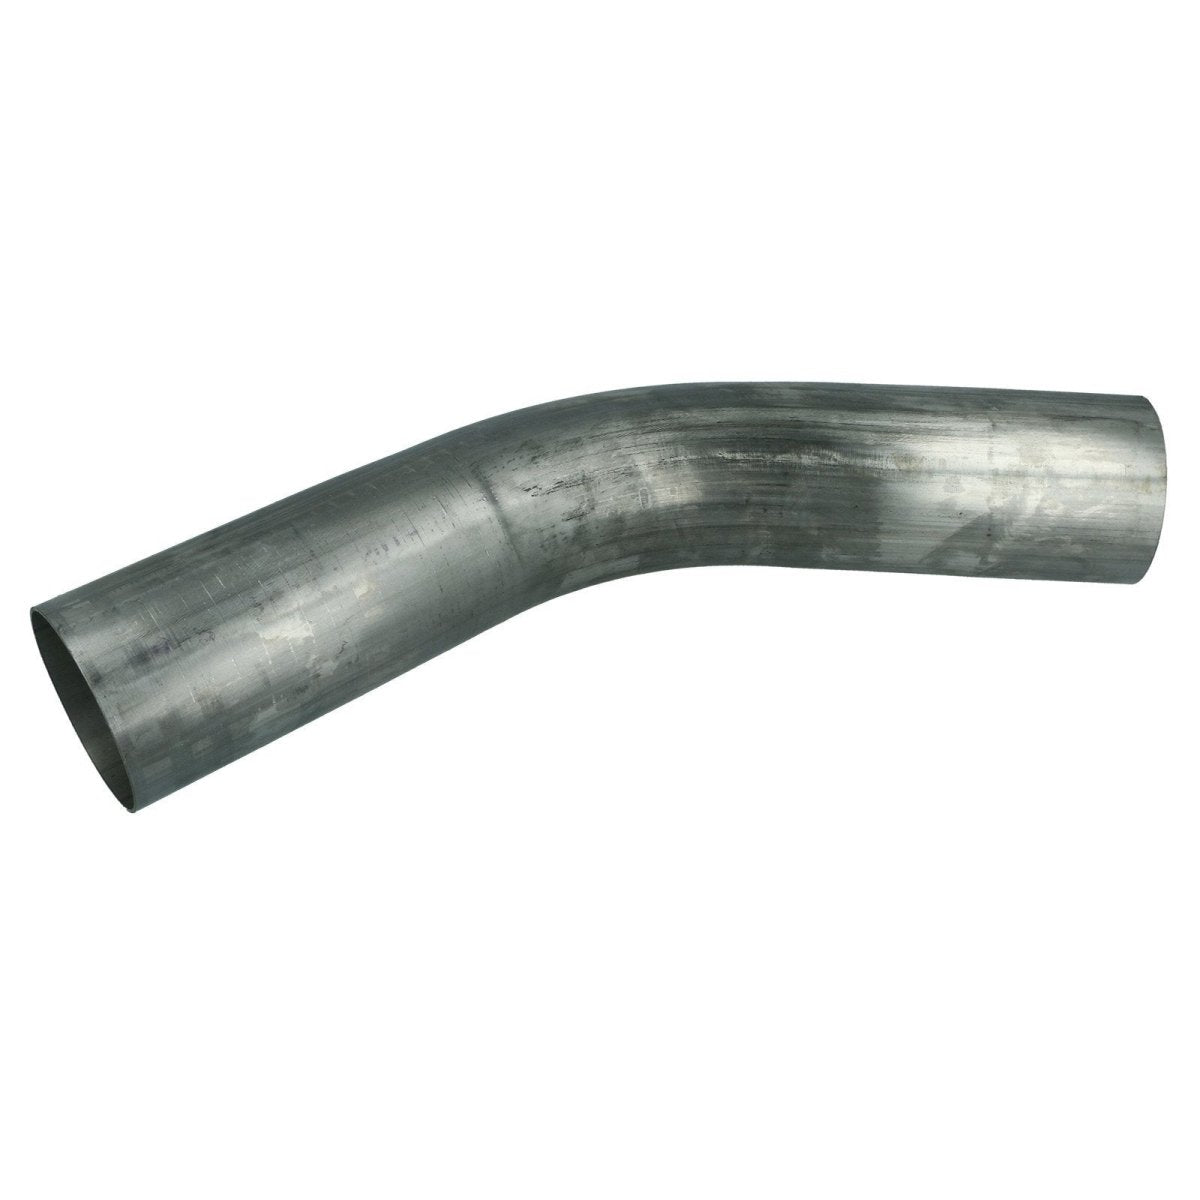 FAMEFORM 45° stainless steel pipe exhaust elbow - PARTS33 GmbH